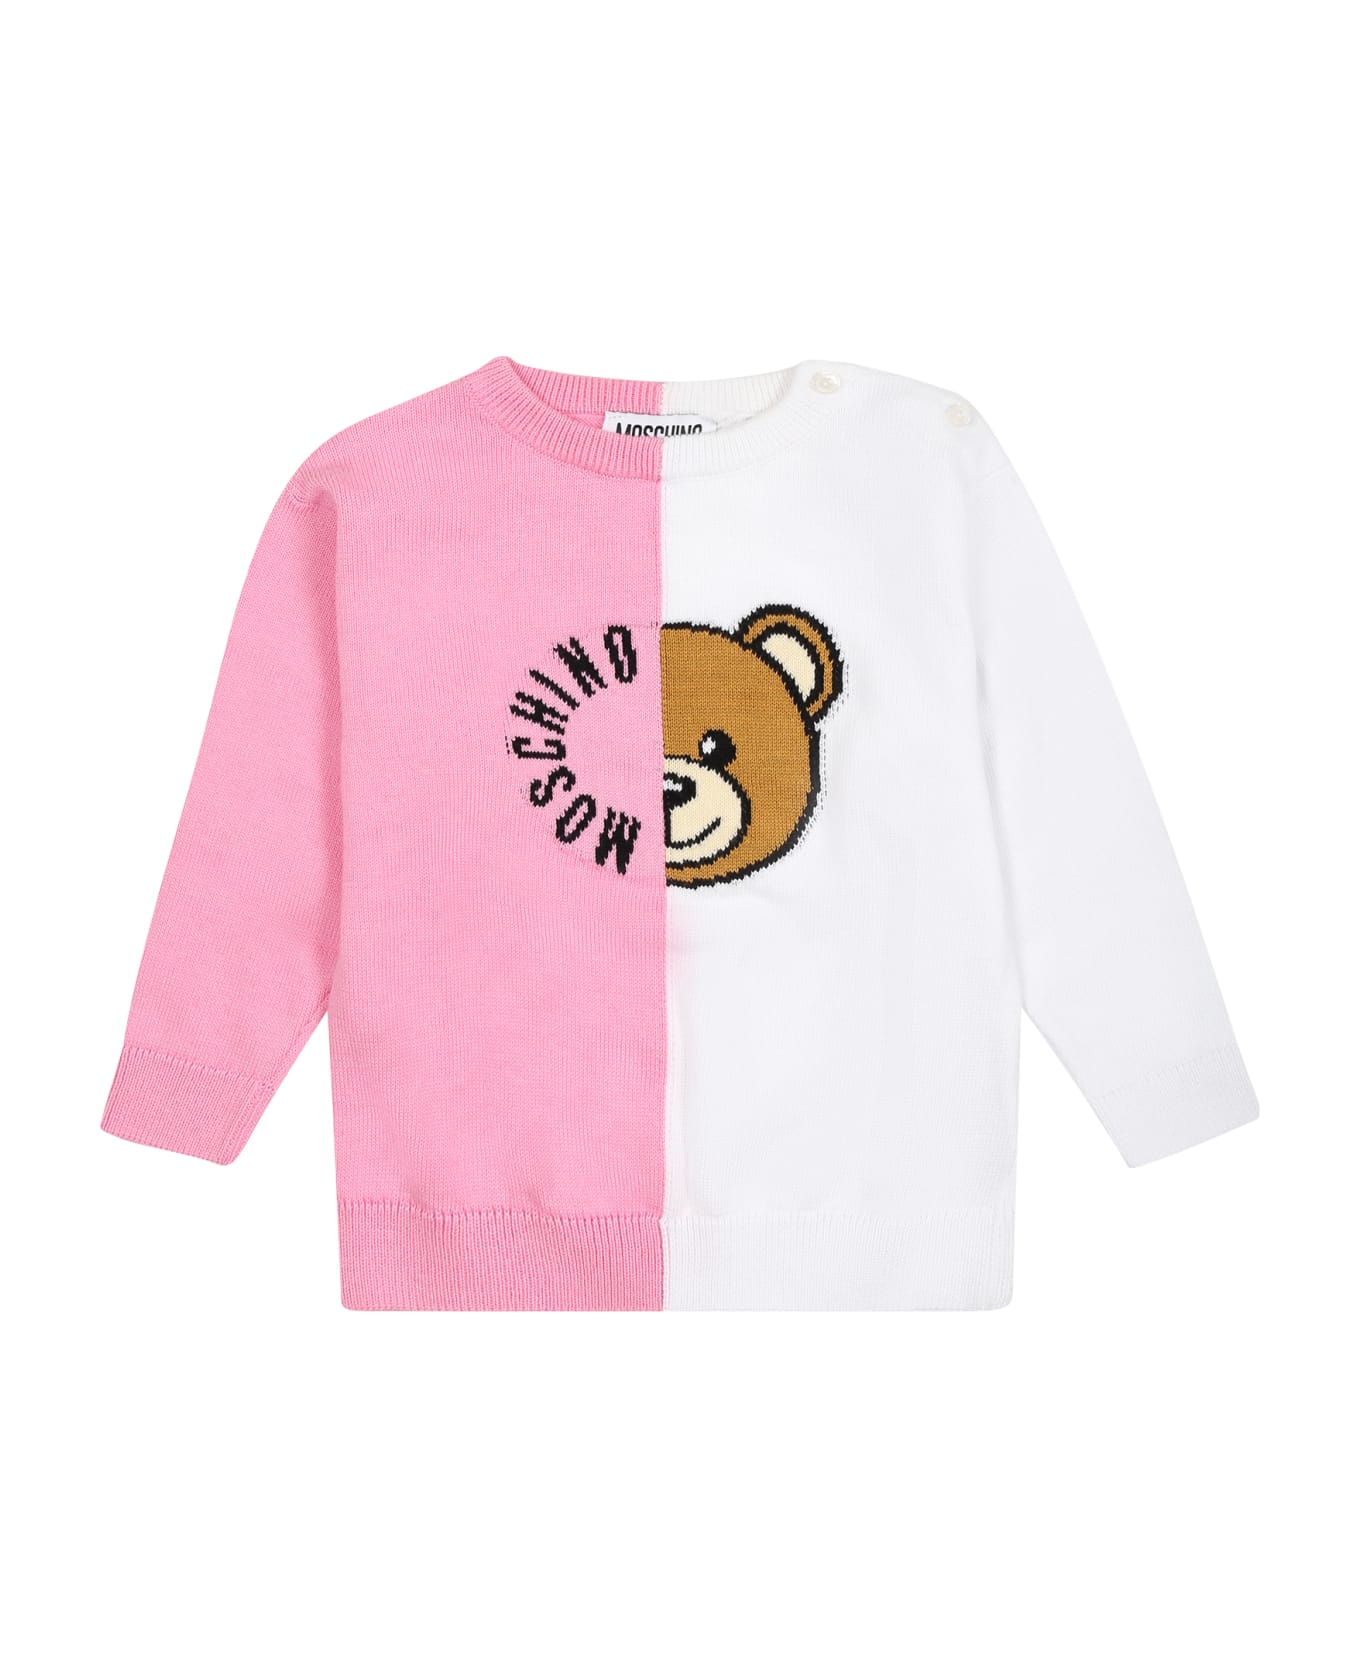 Moschino Multicolor Sweater For Baby Girl With Teddy Bear - Multicolor